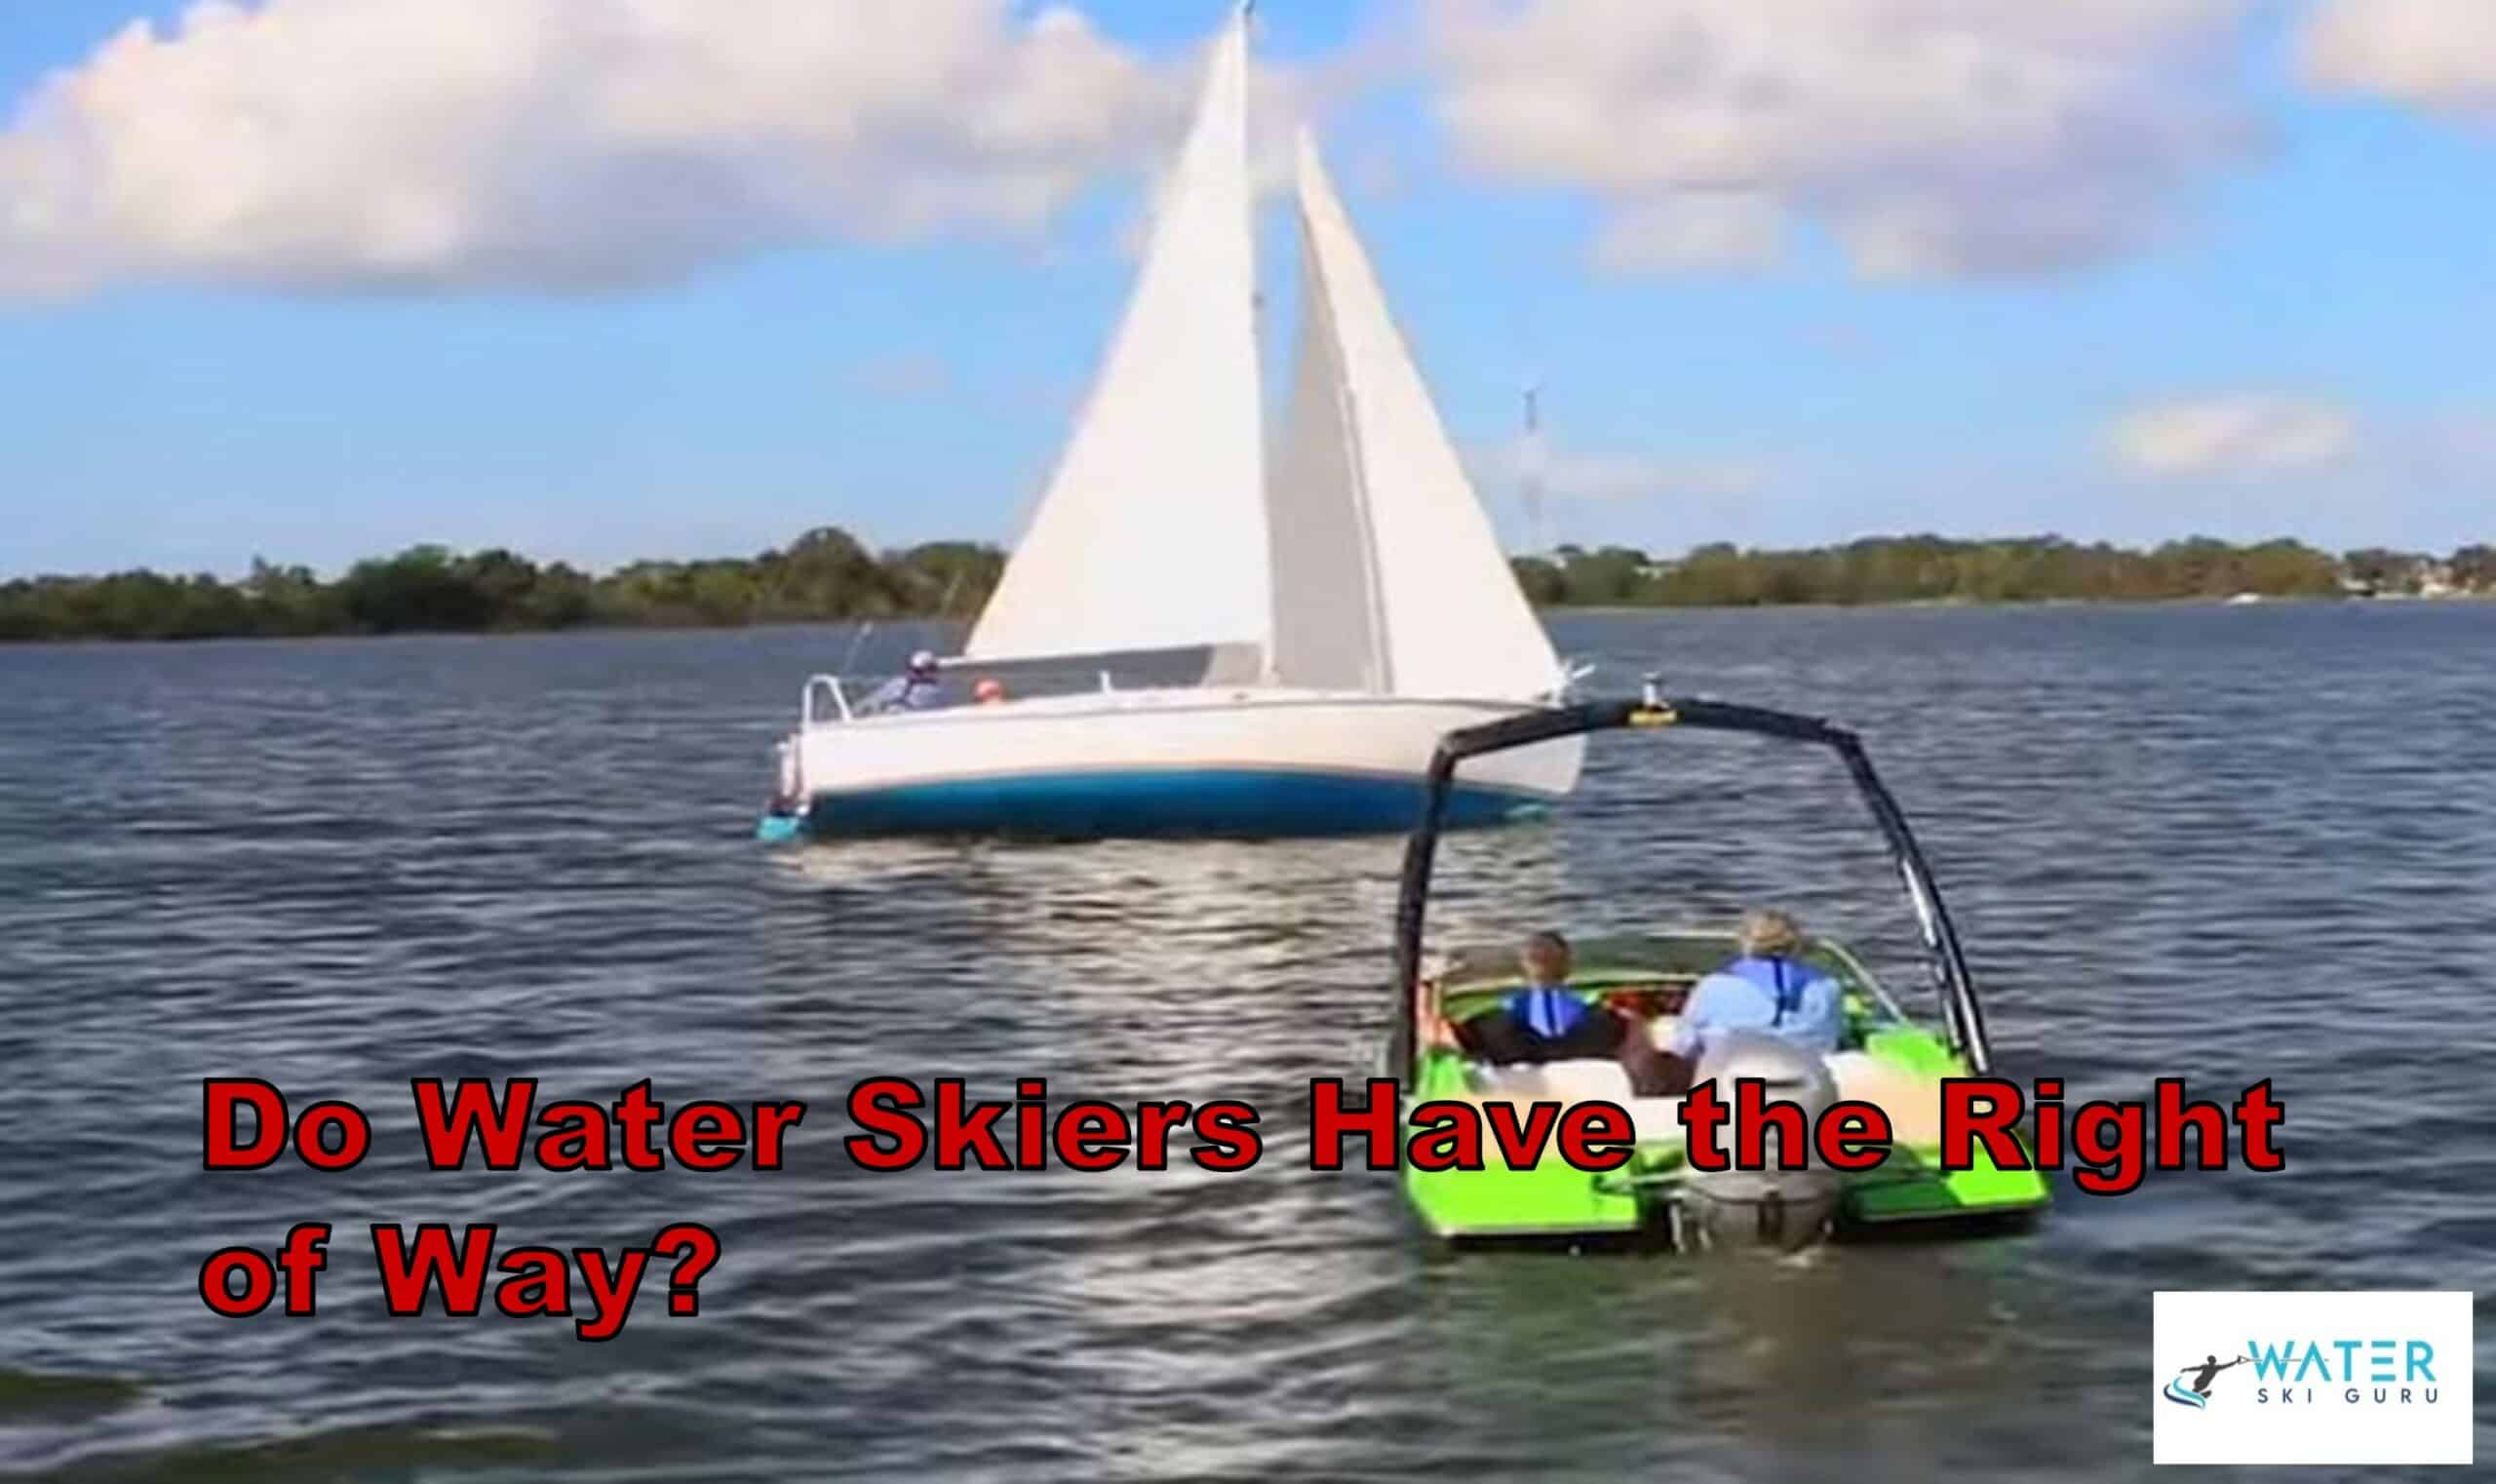 Do Water Skiers Have the Right of Way?